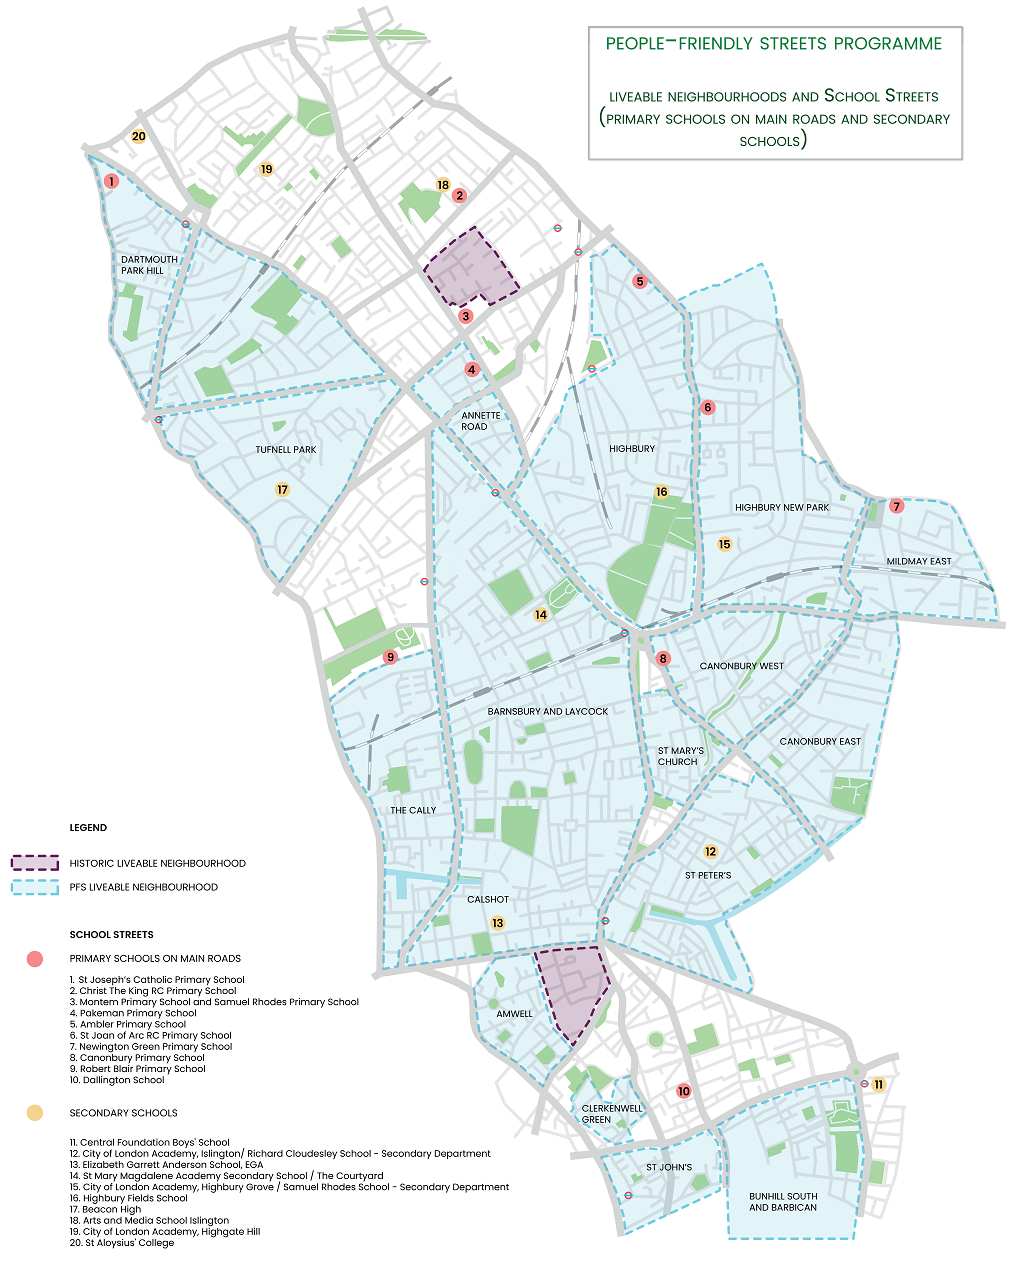 A map of Islington, showing how the borough would look if the council's ambitions for Liveable Neighbourhoods are realised